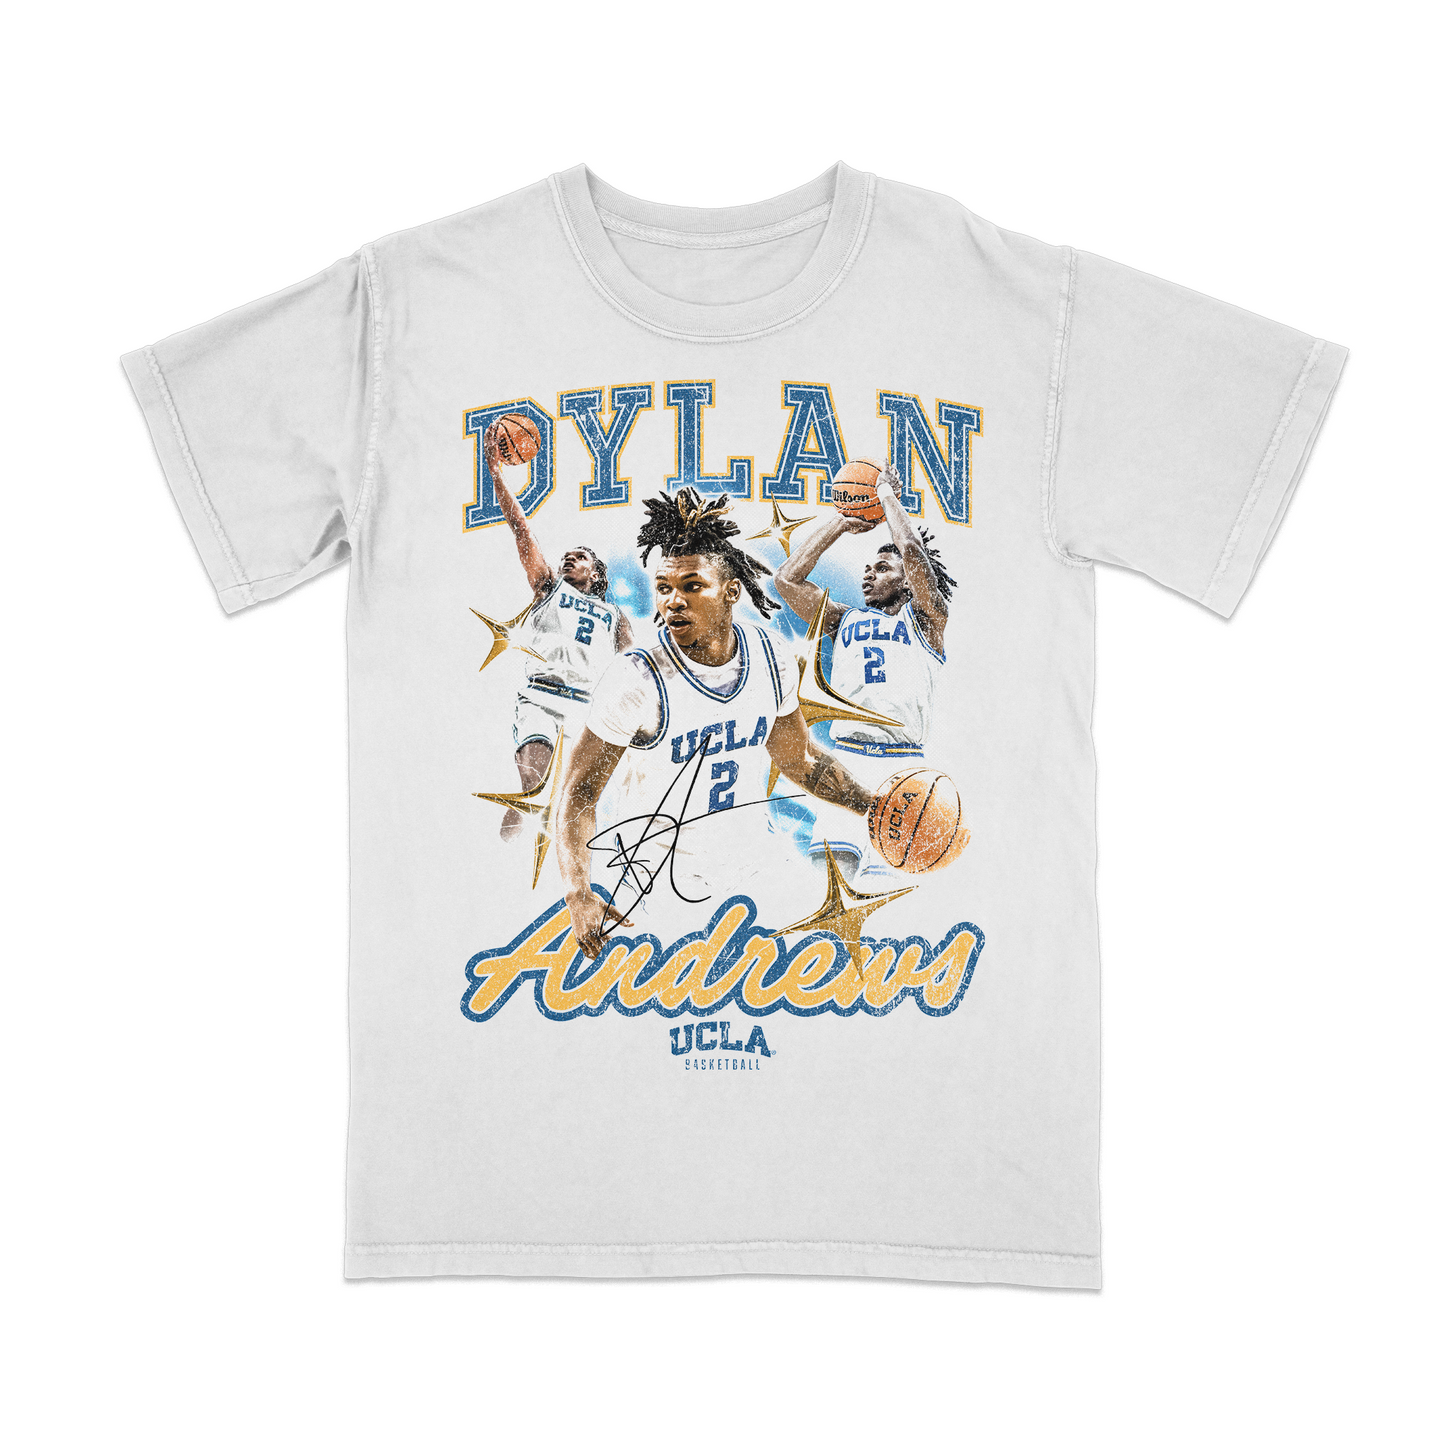 EXCLUSIVE RELEASE: Dylan Andrews Sophomore Season T-Shirt